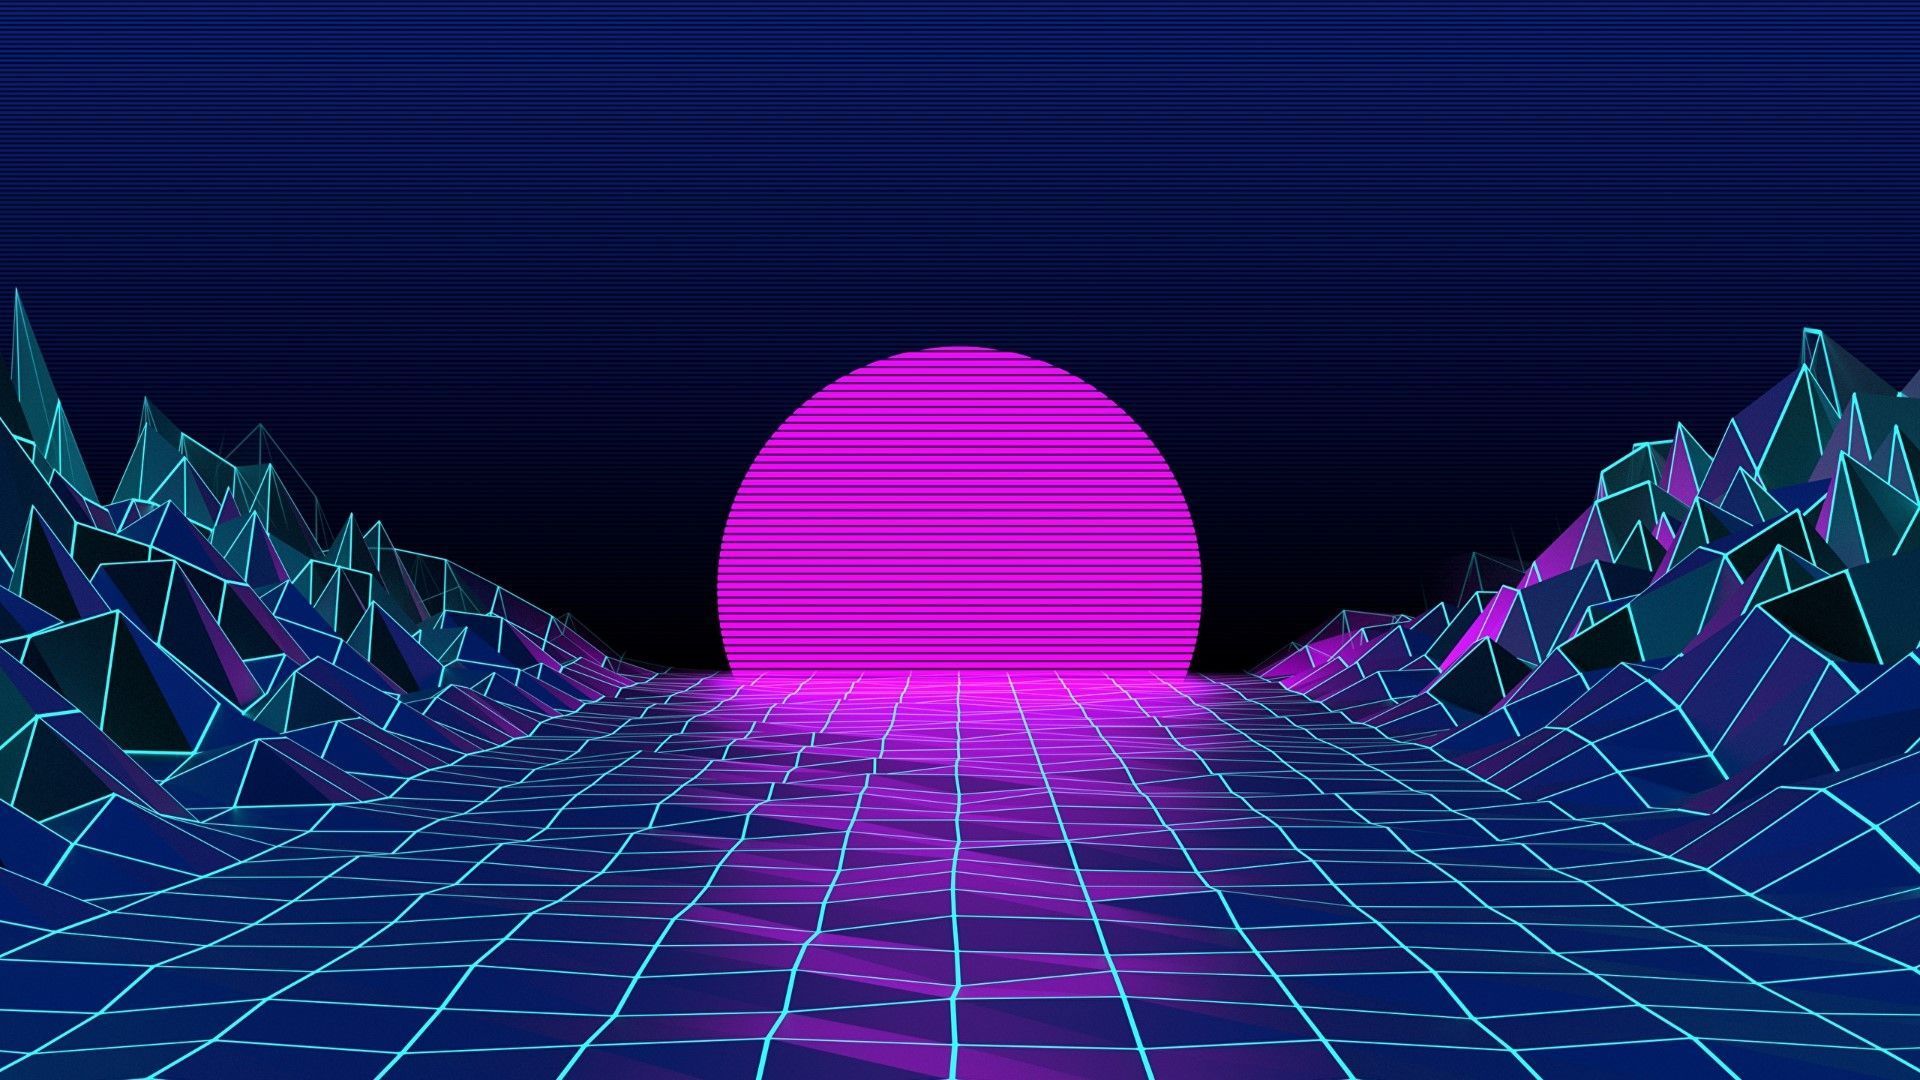 80s synthwave wallpaper 4k 2019 1920x1080 2019 1920x1080 - YouTube